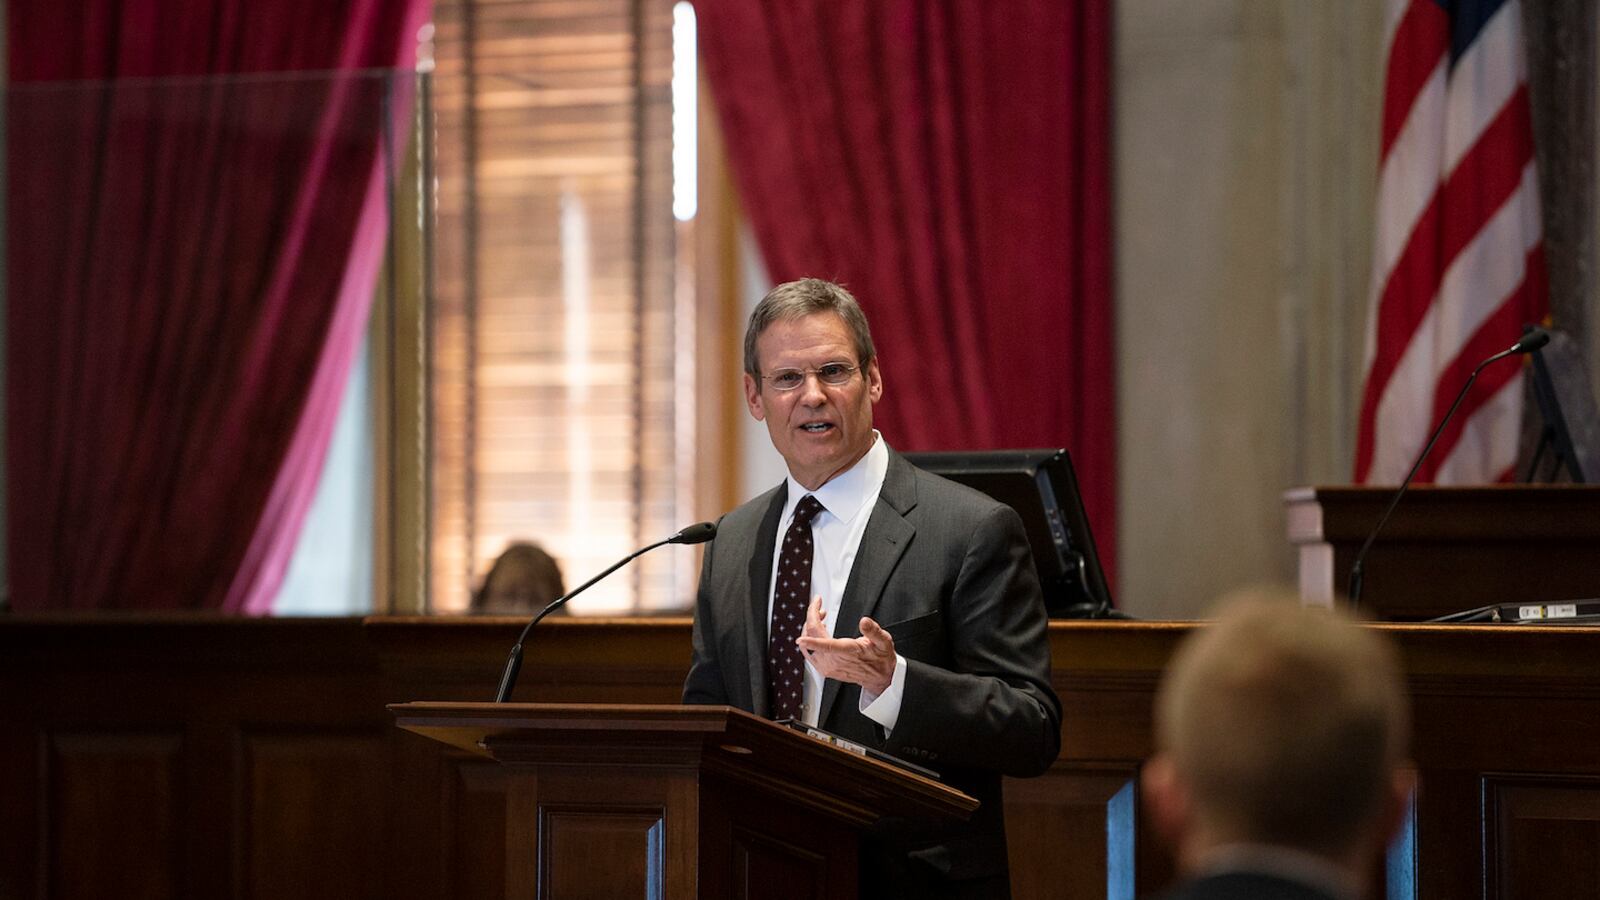 Bill Lee became Tennessee's 50th governor on Jan. 19.